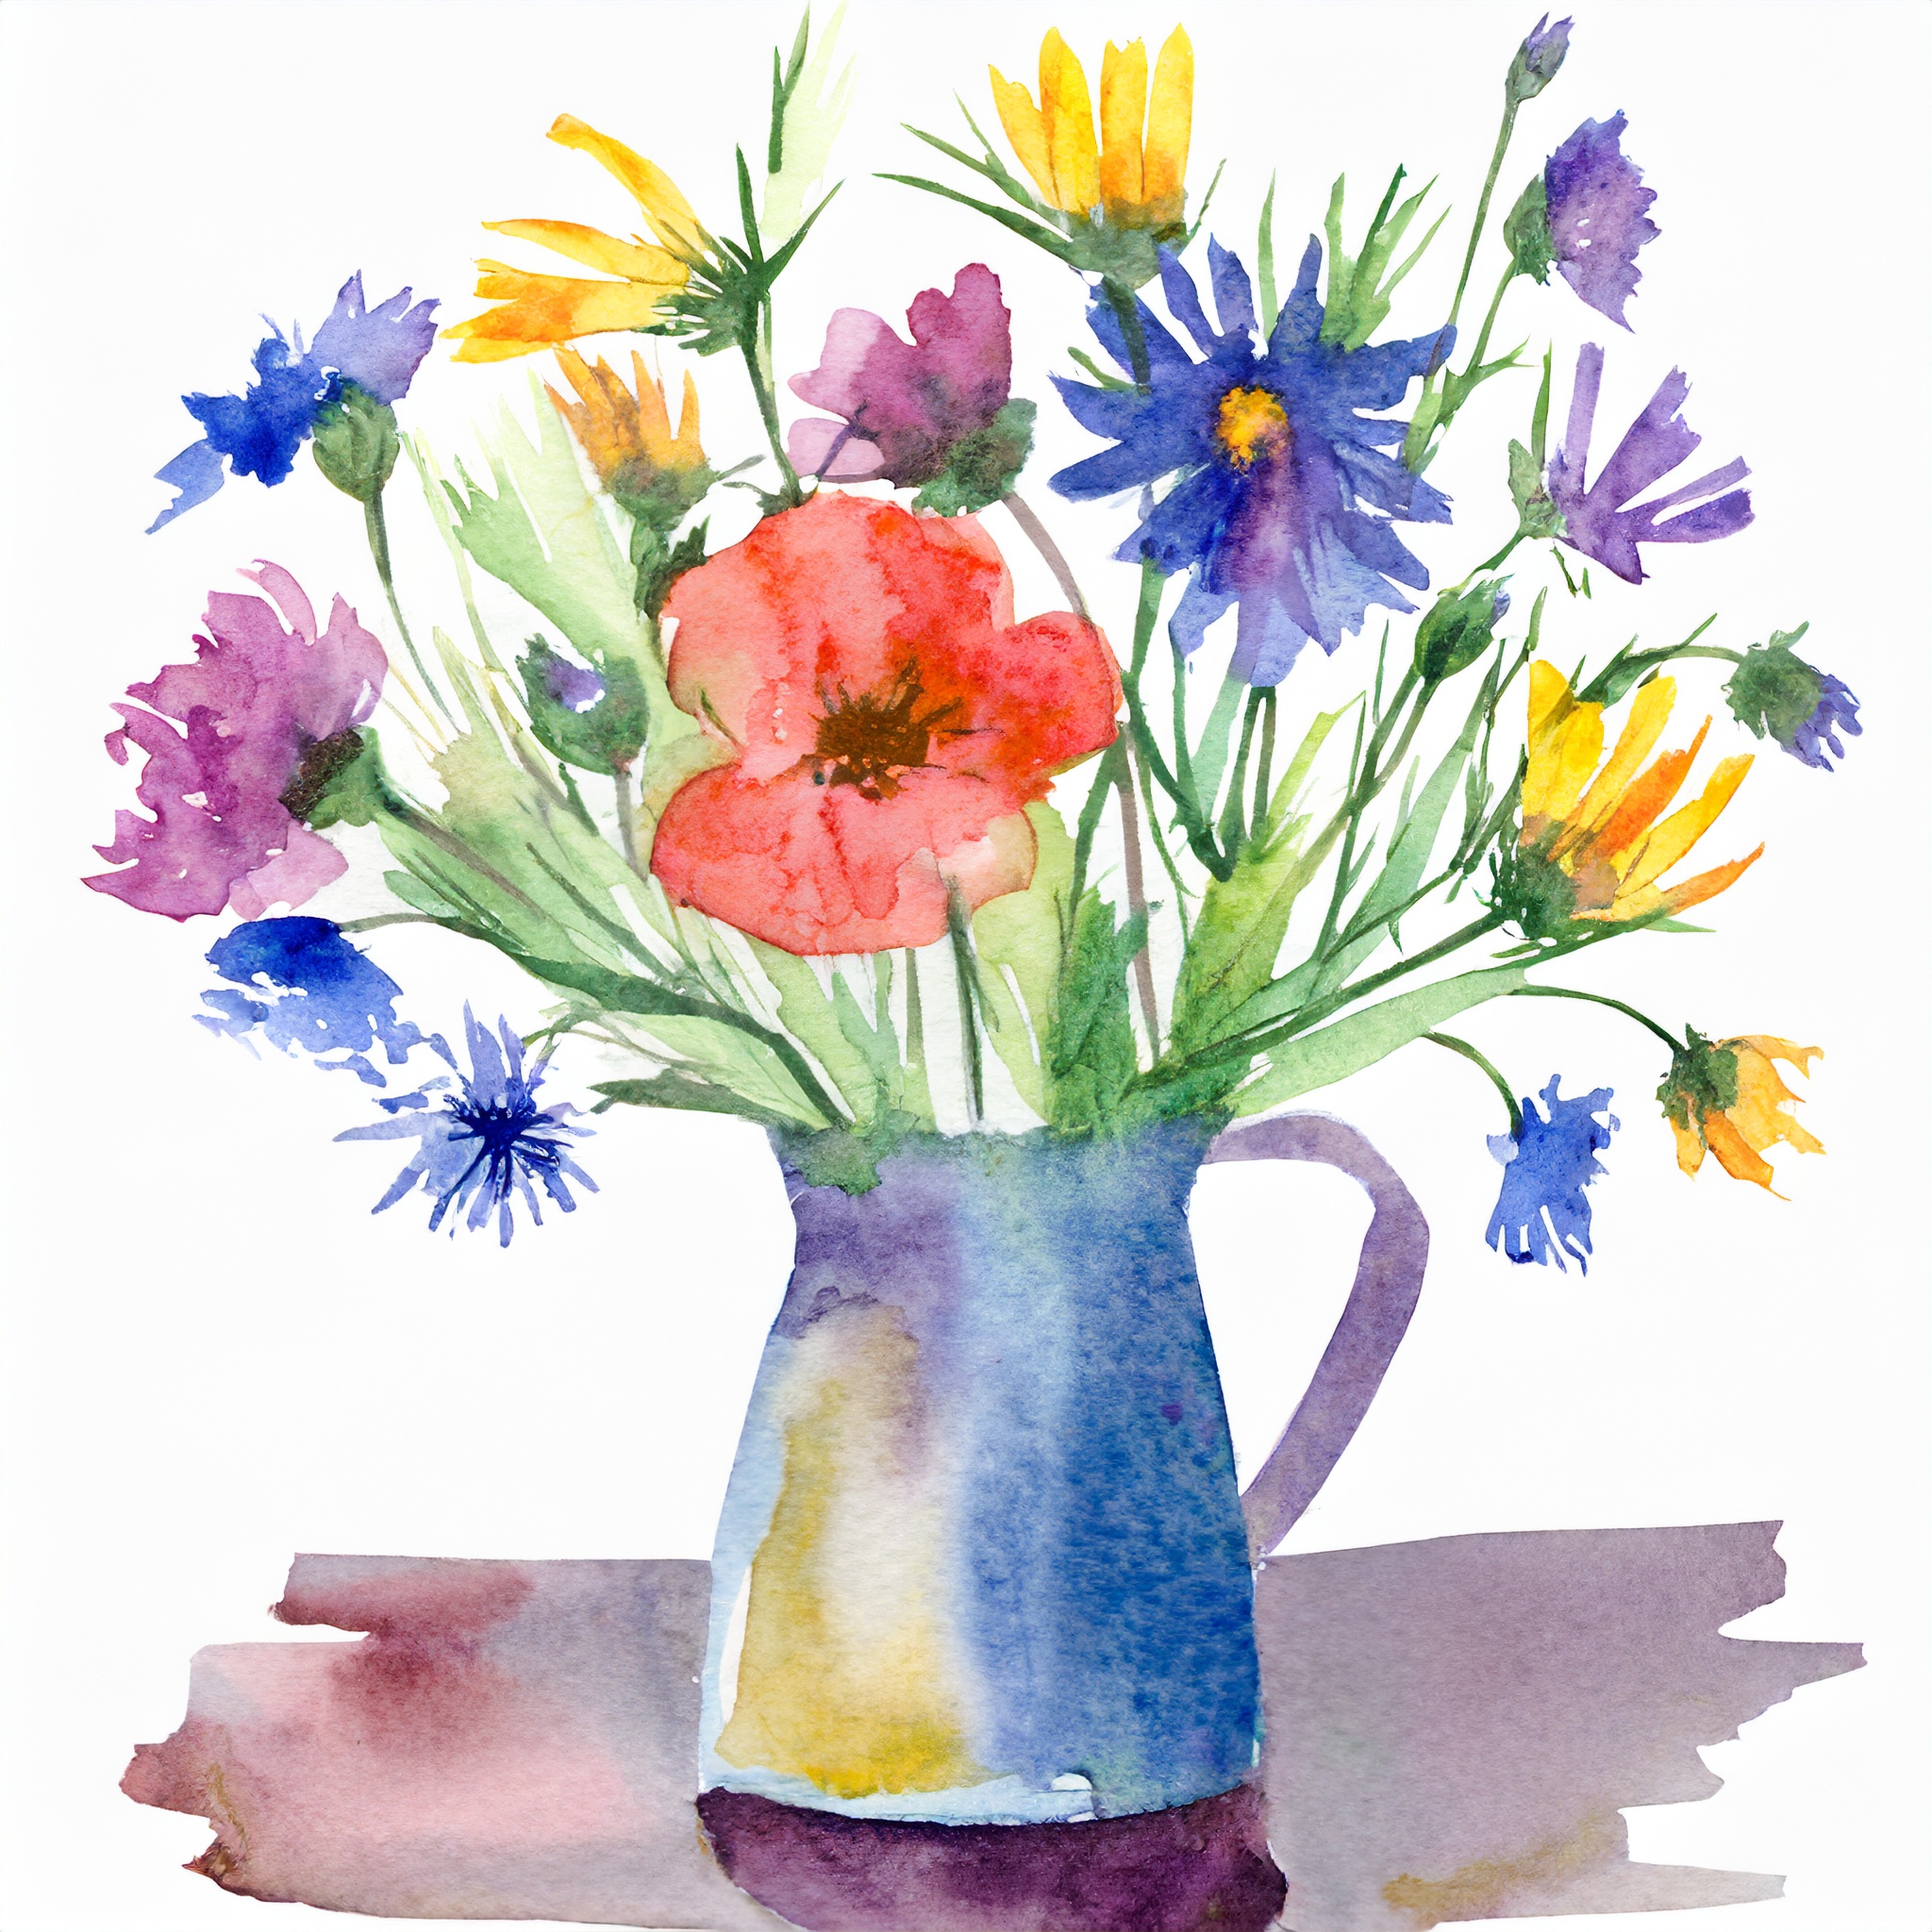 How to Paint Wildflowers in Watercolor